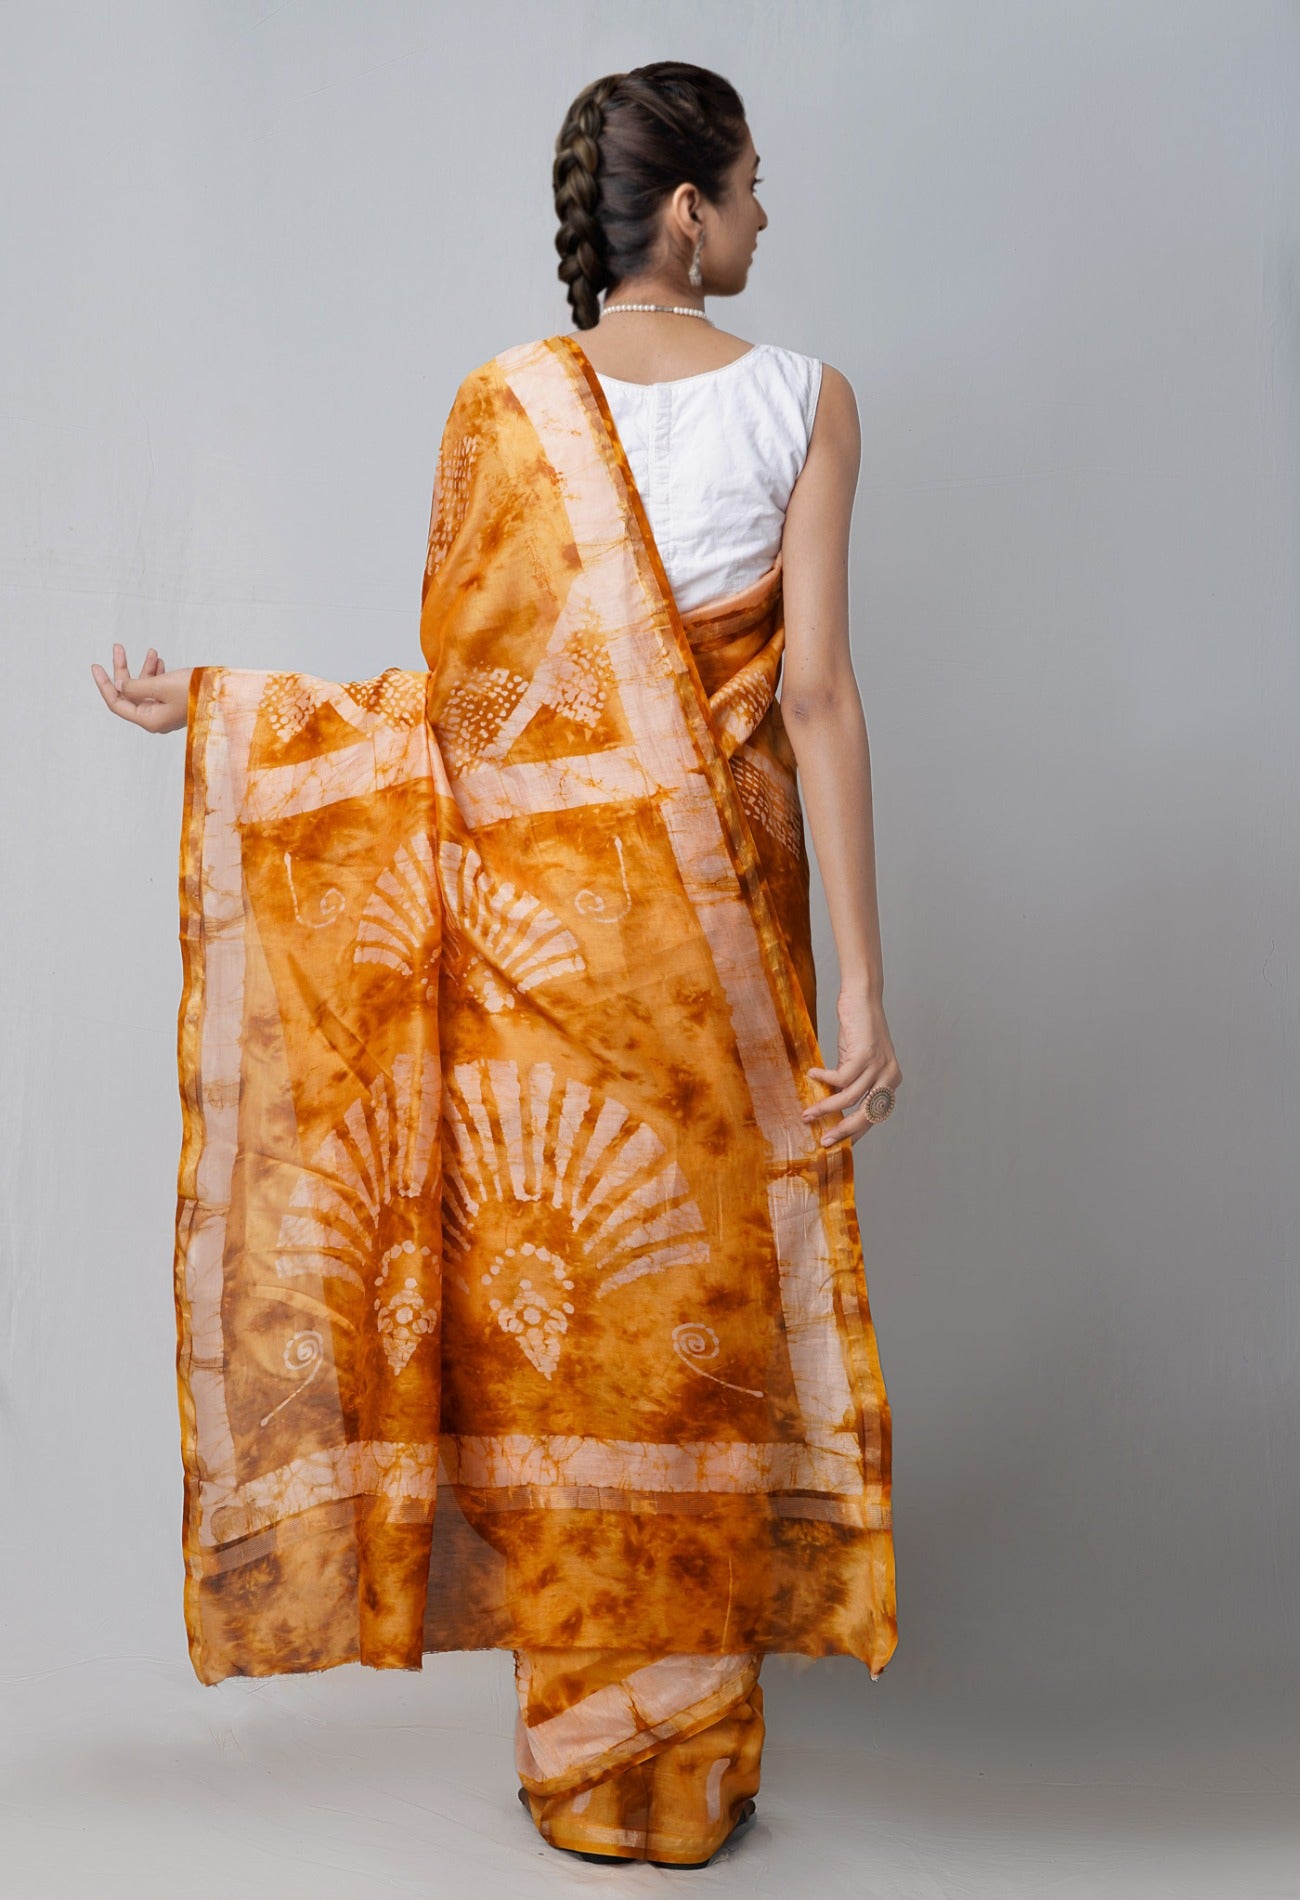 Online Shopping for Rust Orange Pure Fusion Batik Chanderi Sico Saree with Fancy/Ethnic Prints from Rajasthan at Unnatisilks.com India
